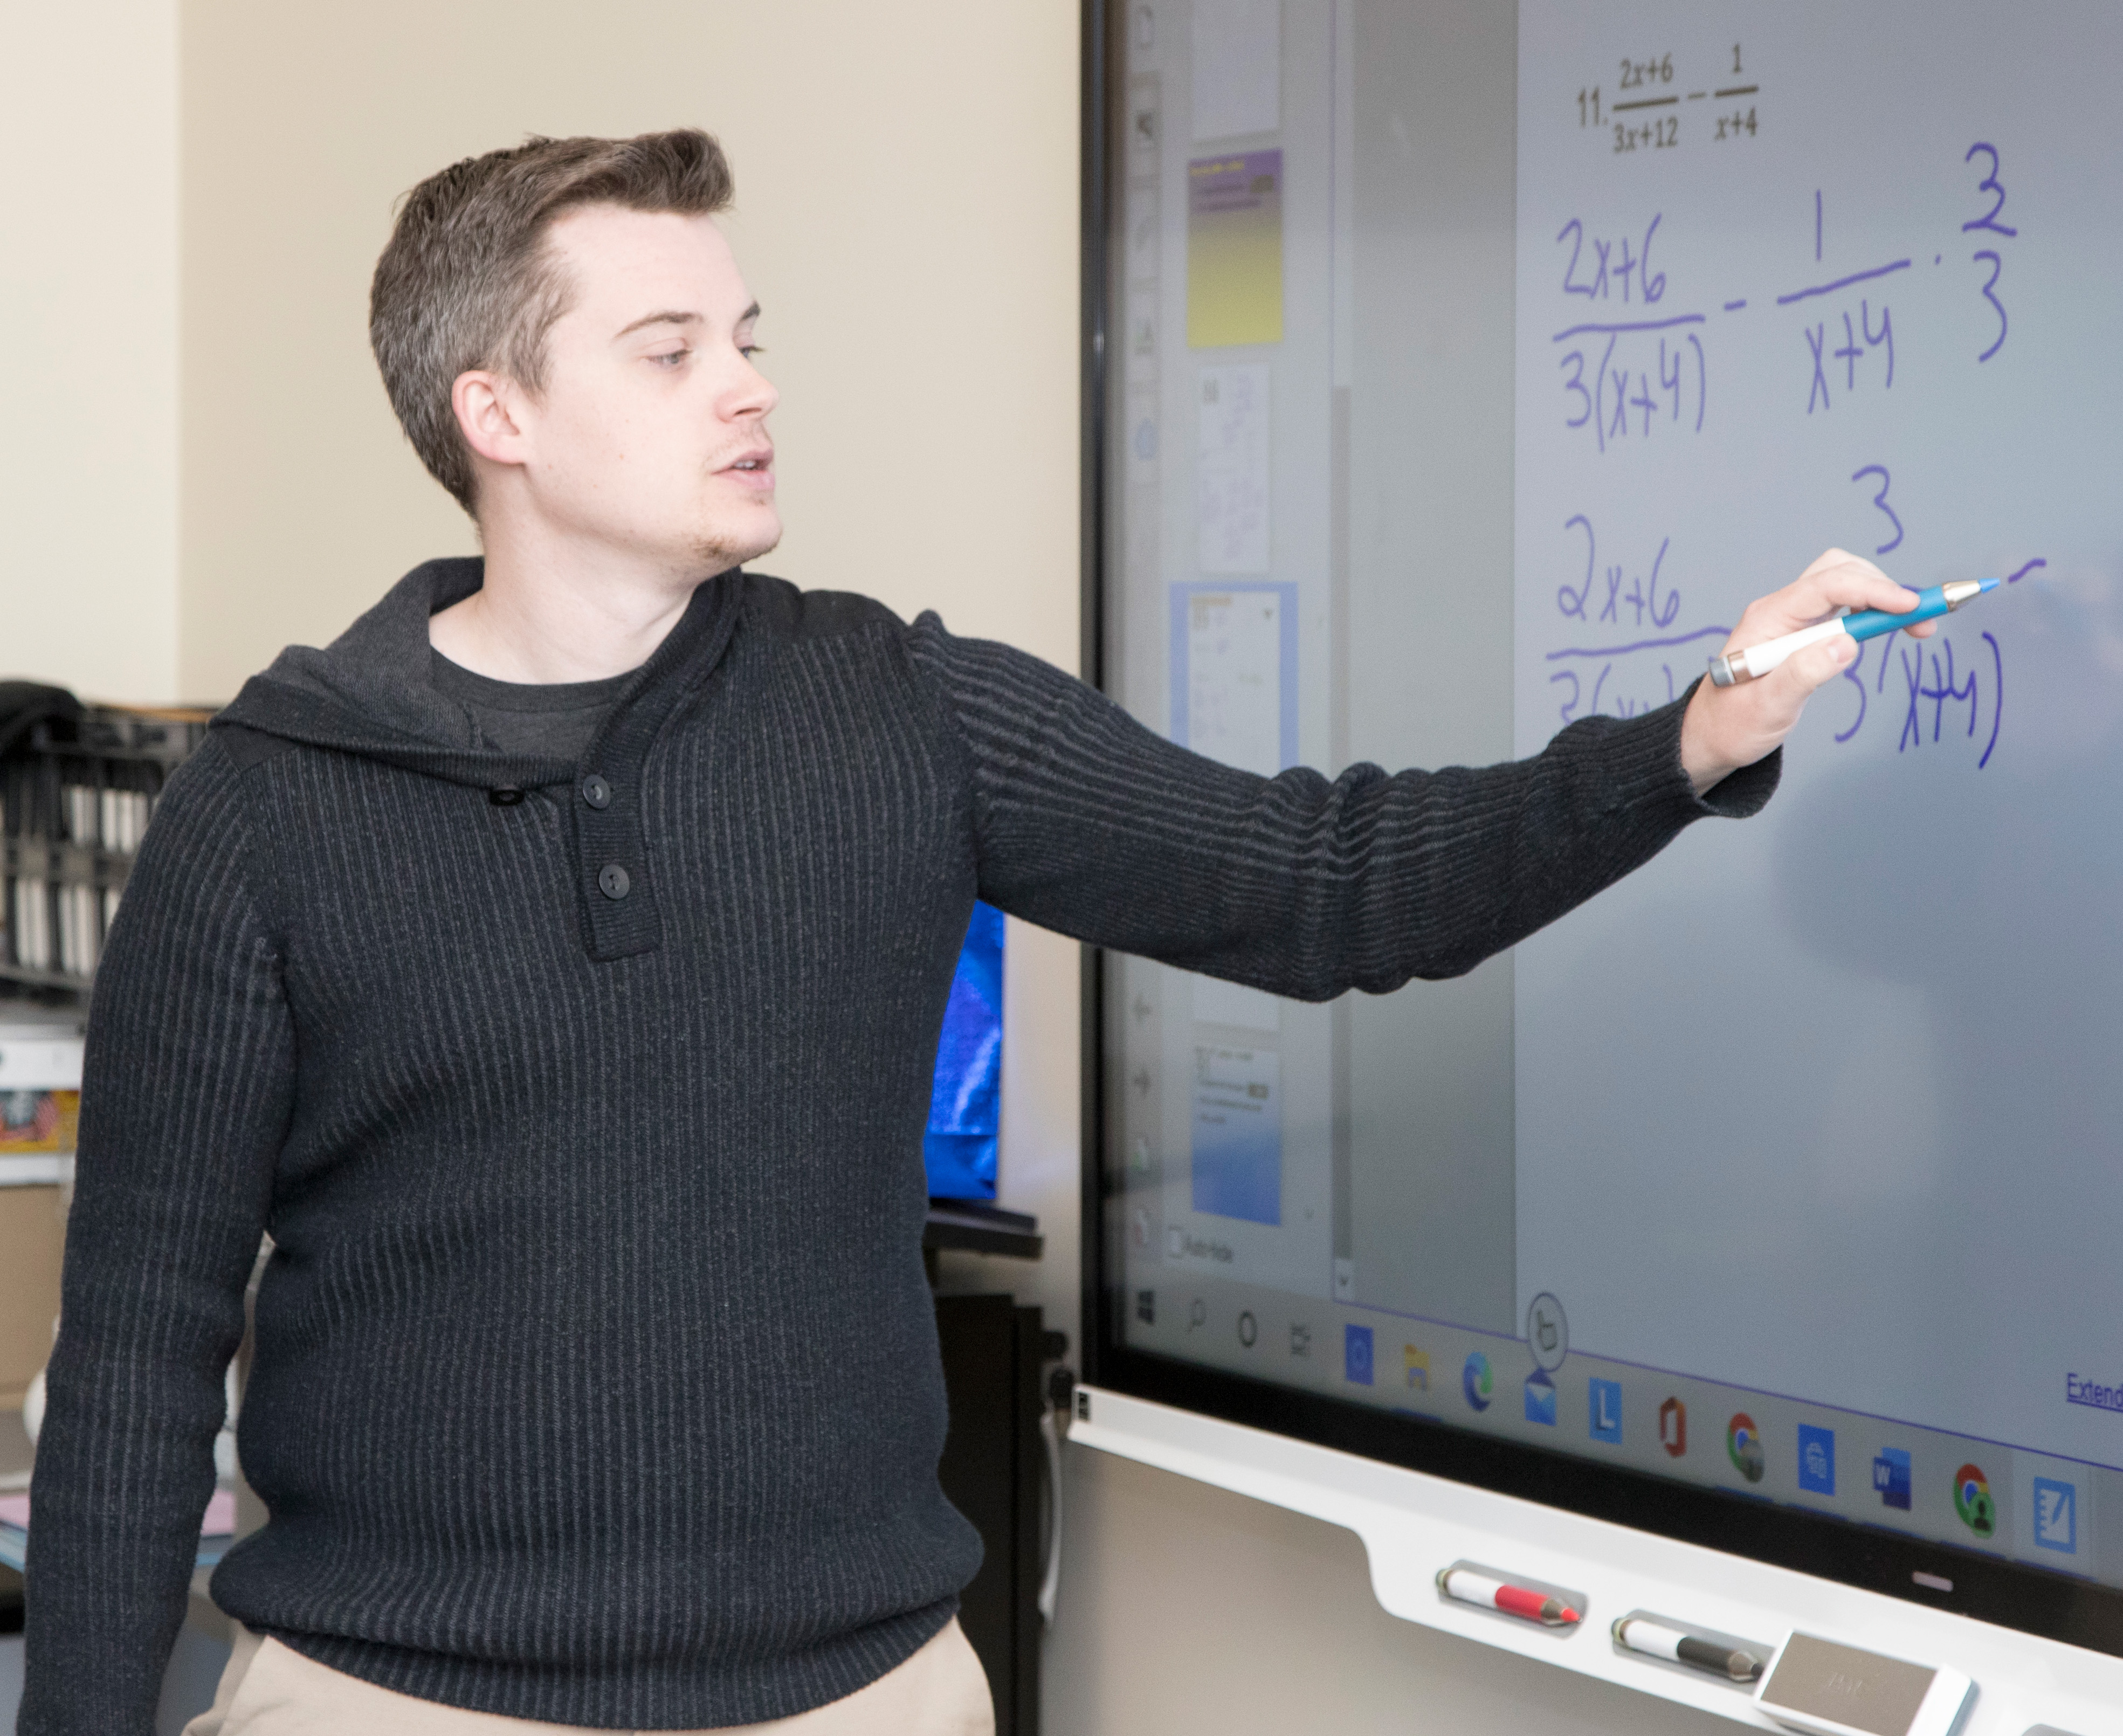 Student completes equation on SMART board